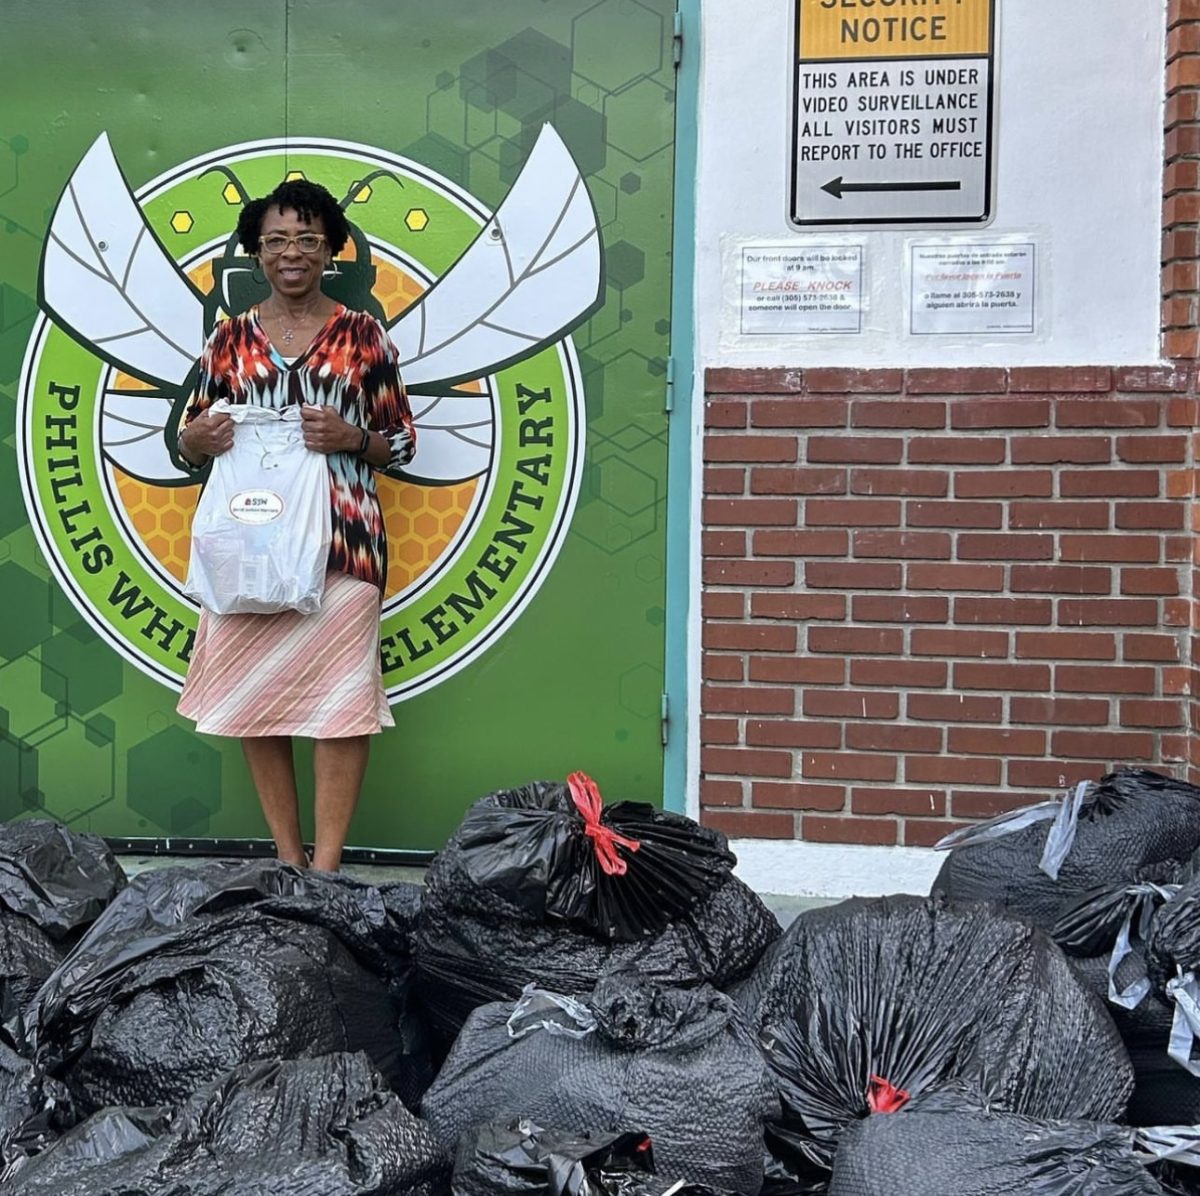 Social+Justice+Warriors+%28SJW%29+delivered+400+bags+of+food+to+Phillis+Wheatley+Elementary.+The+club+continues+to+do+these+initiatives+year+after+year+to+provide+a+helping+hand+to+those+in+need.+It+comforts+me+knowing+I+am+giving+back+to+my+community+as+best+I+can%2C+junior+SJW+member+Daniel+Wood+said.